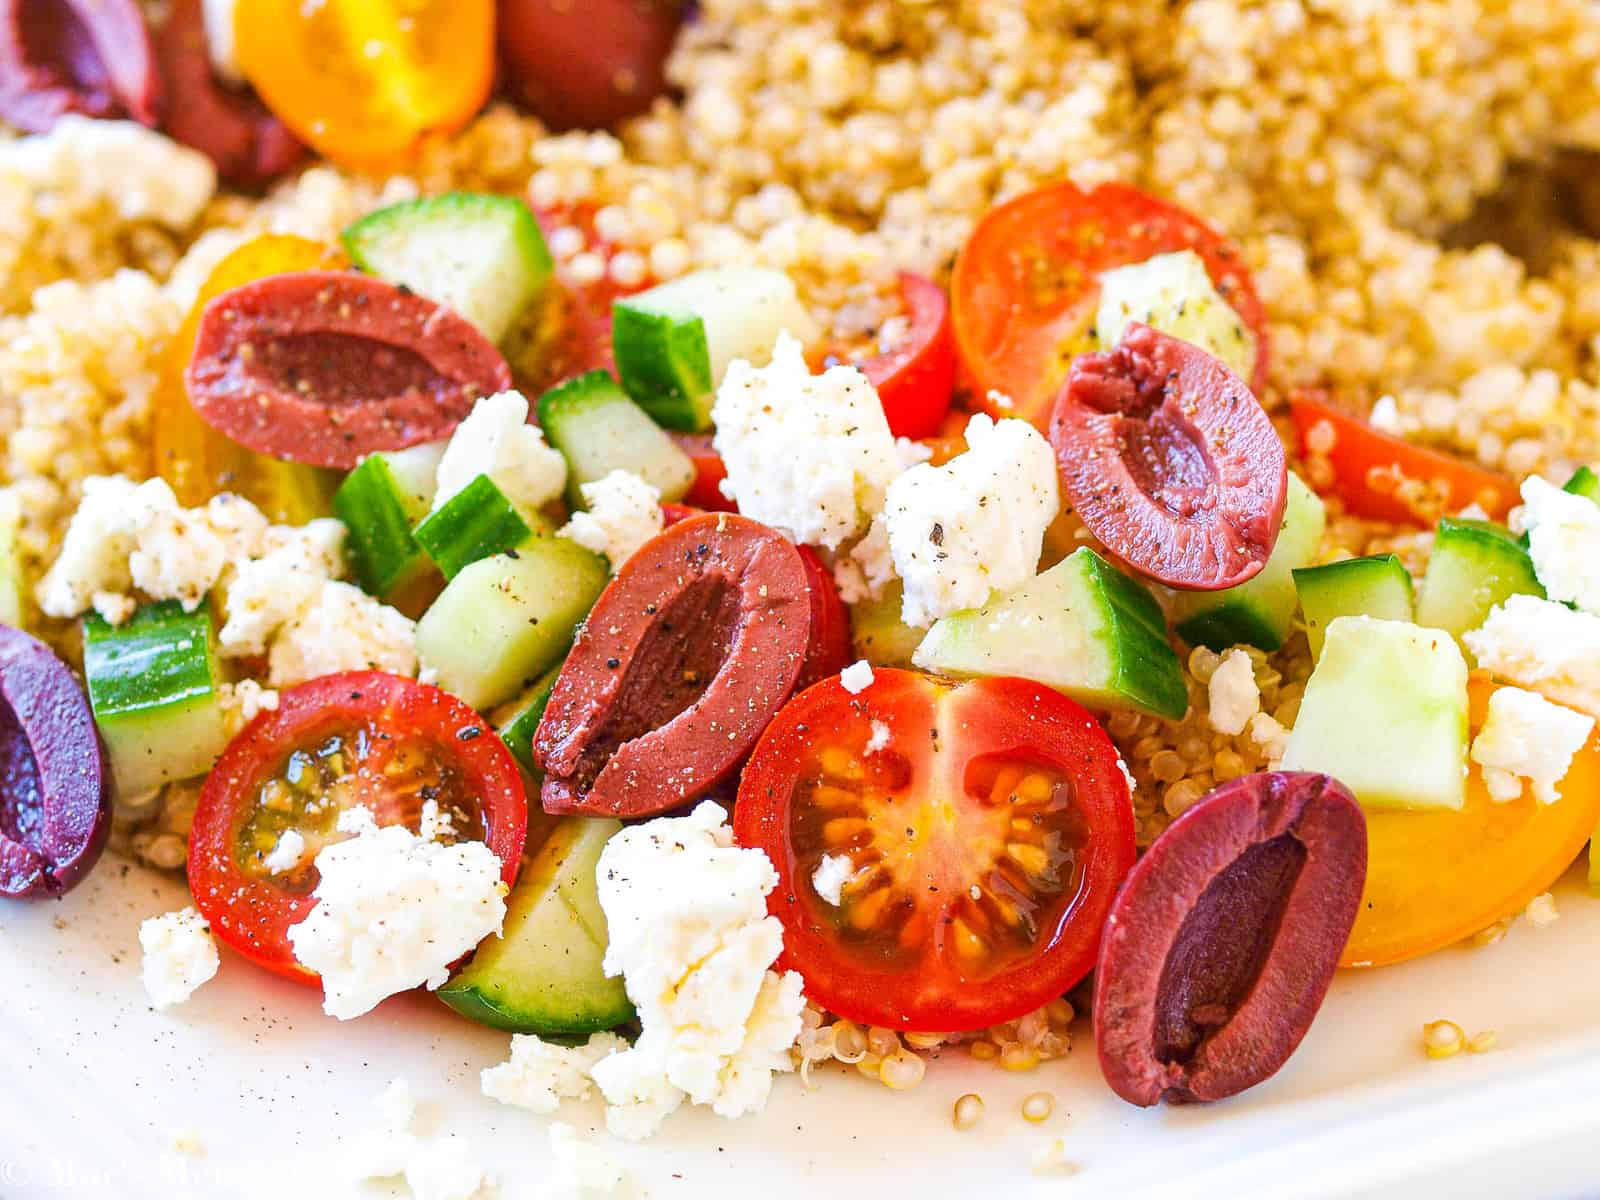 An upclose shot of the olives, tomatoes, cucumbers, sweet peppers, and feta over quinoa